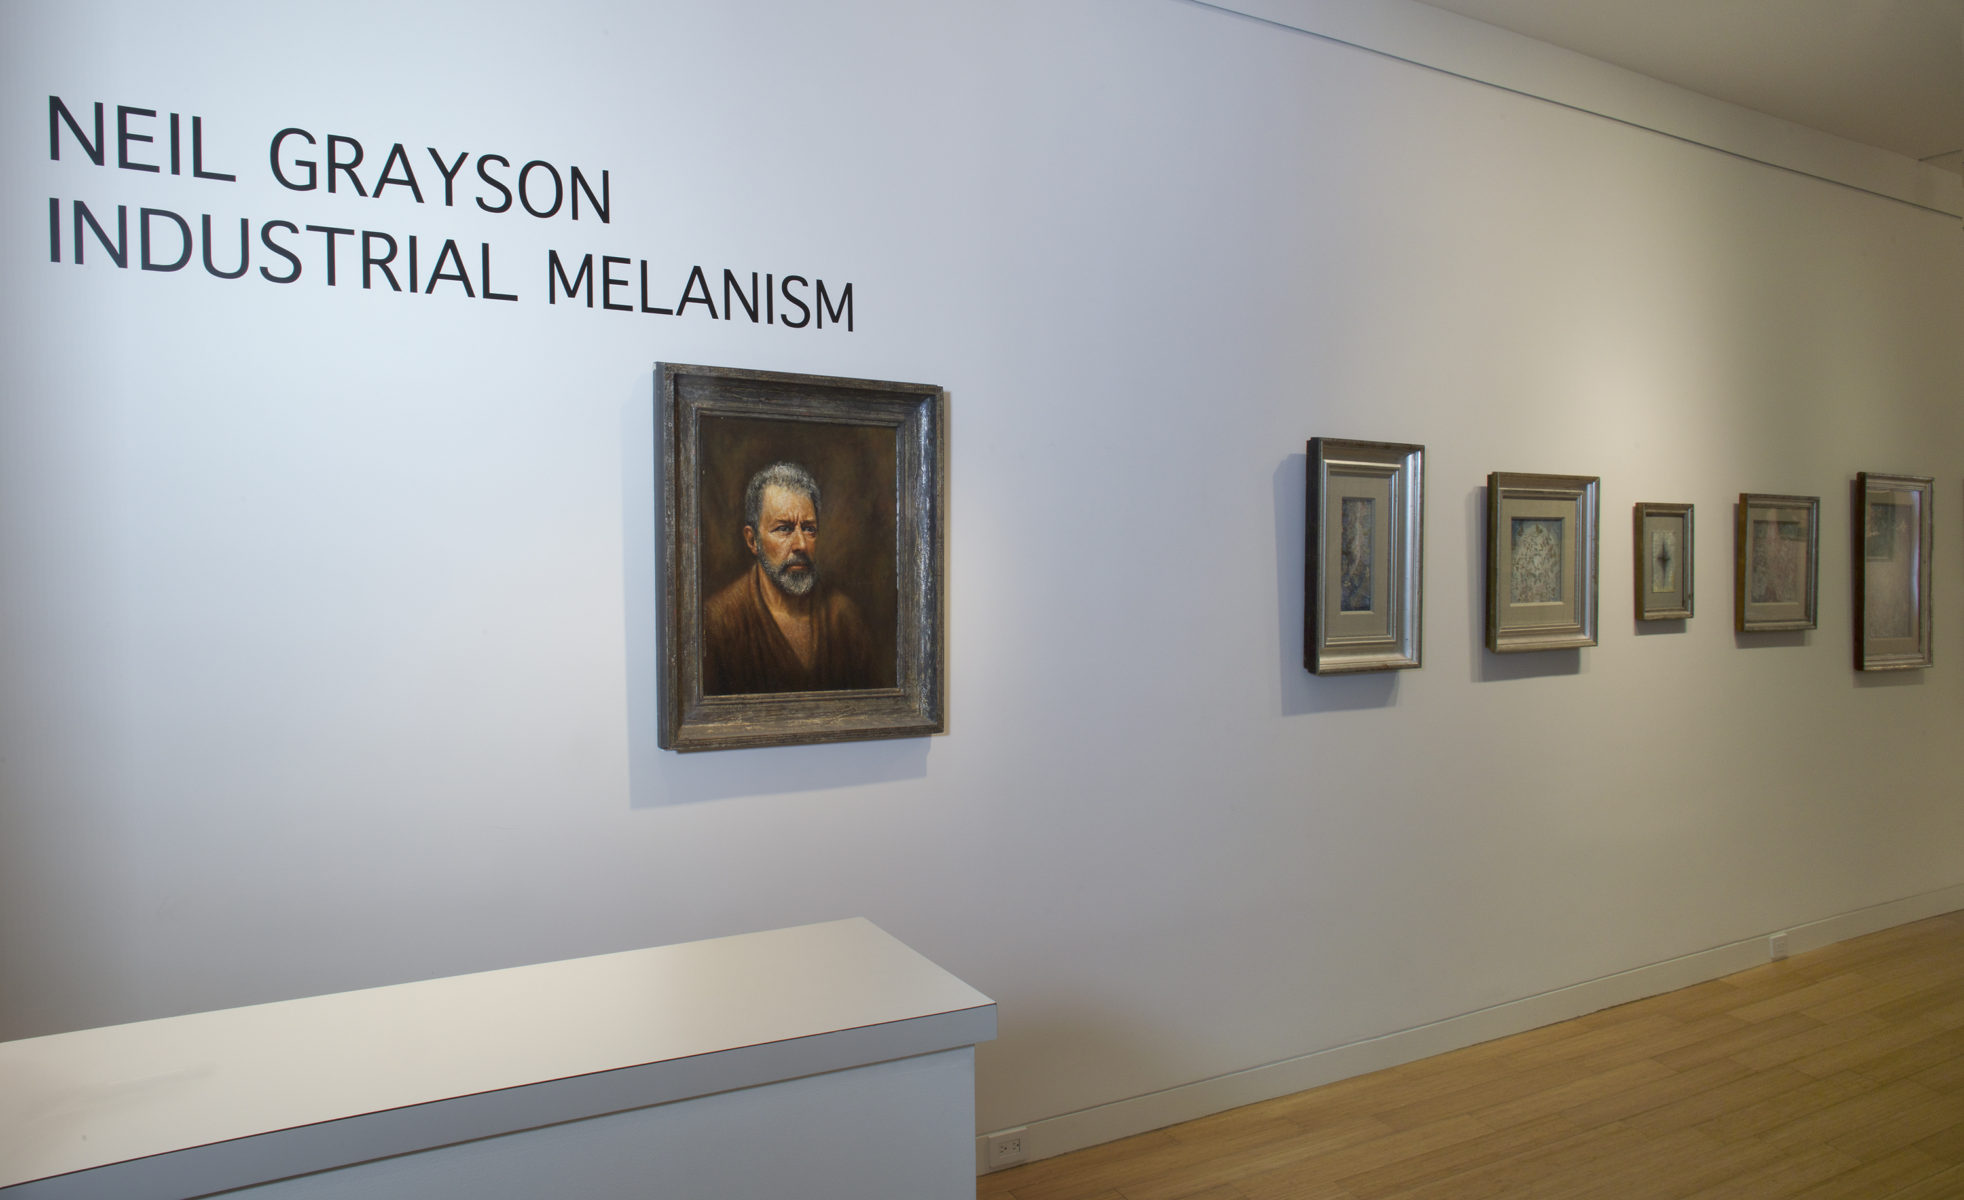 Neil Grayson, Industrial Melanism <br>Solo exhibition at Eykyn Maclean Gallery NYC